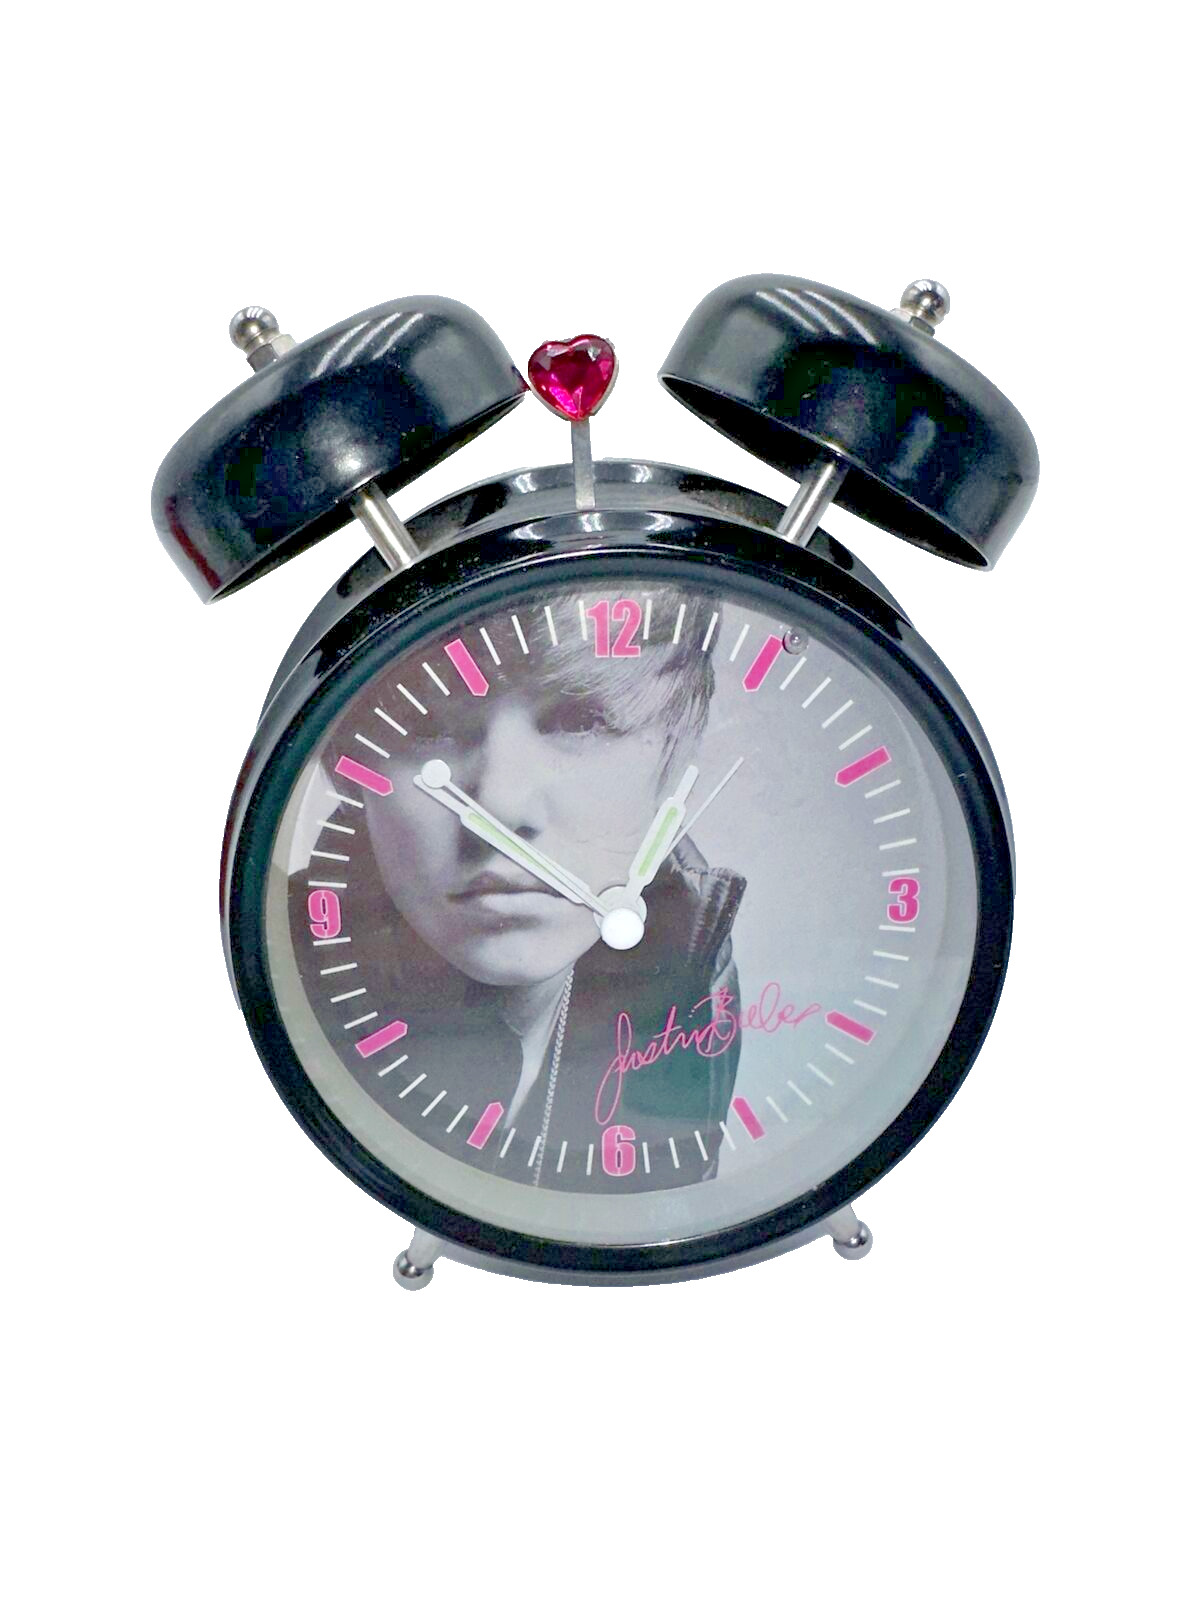 Justin Bieber Alarm Clock Twin Bell Style - Black w/ Pink Accents - Tested Works